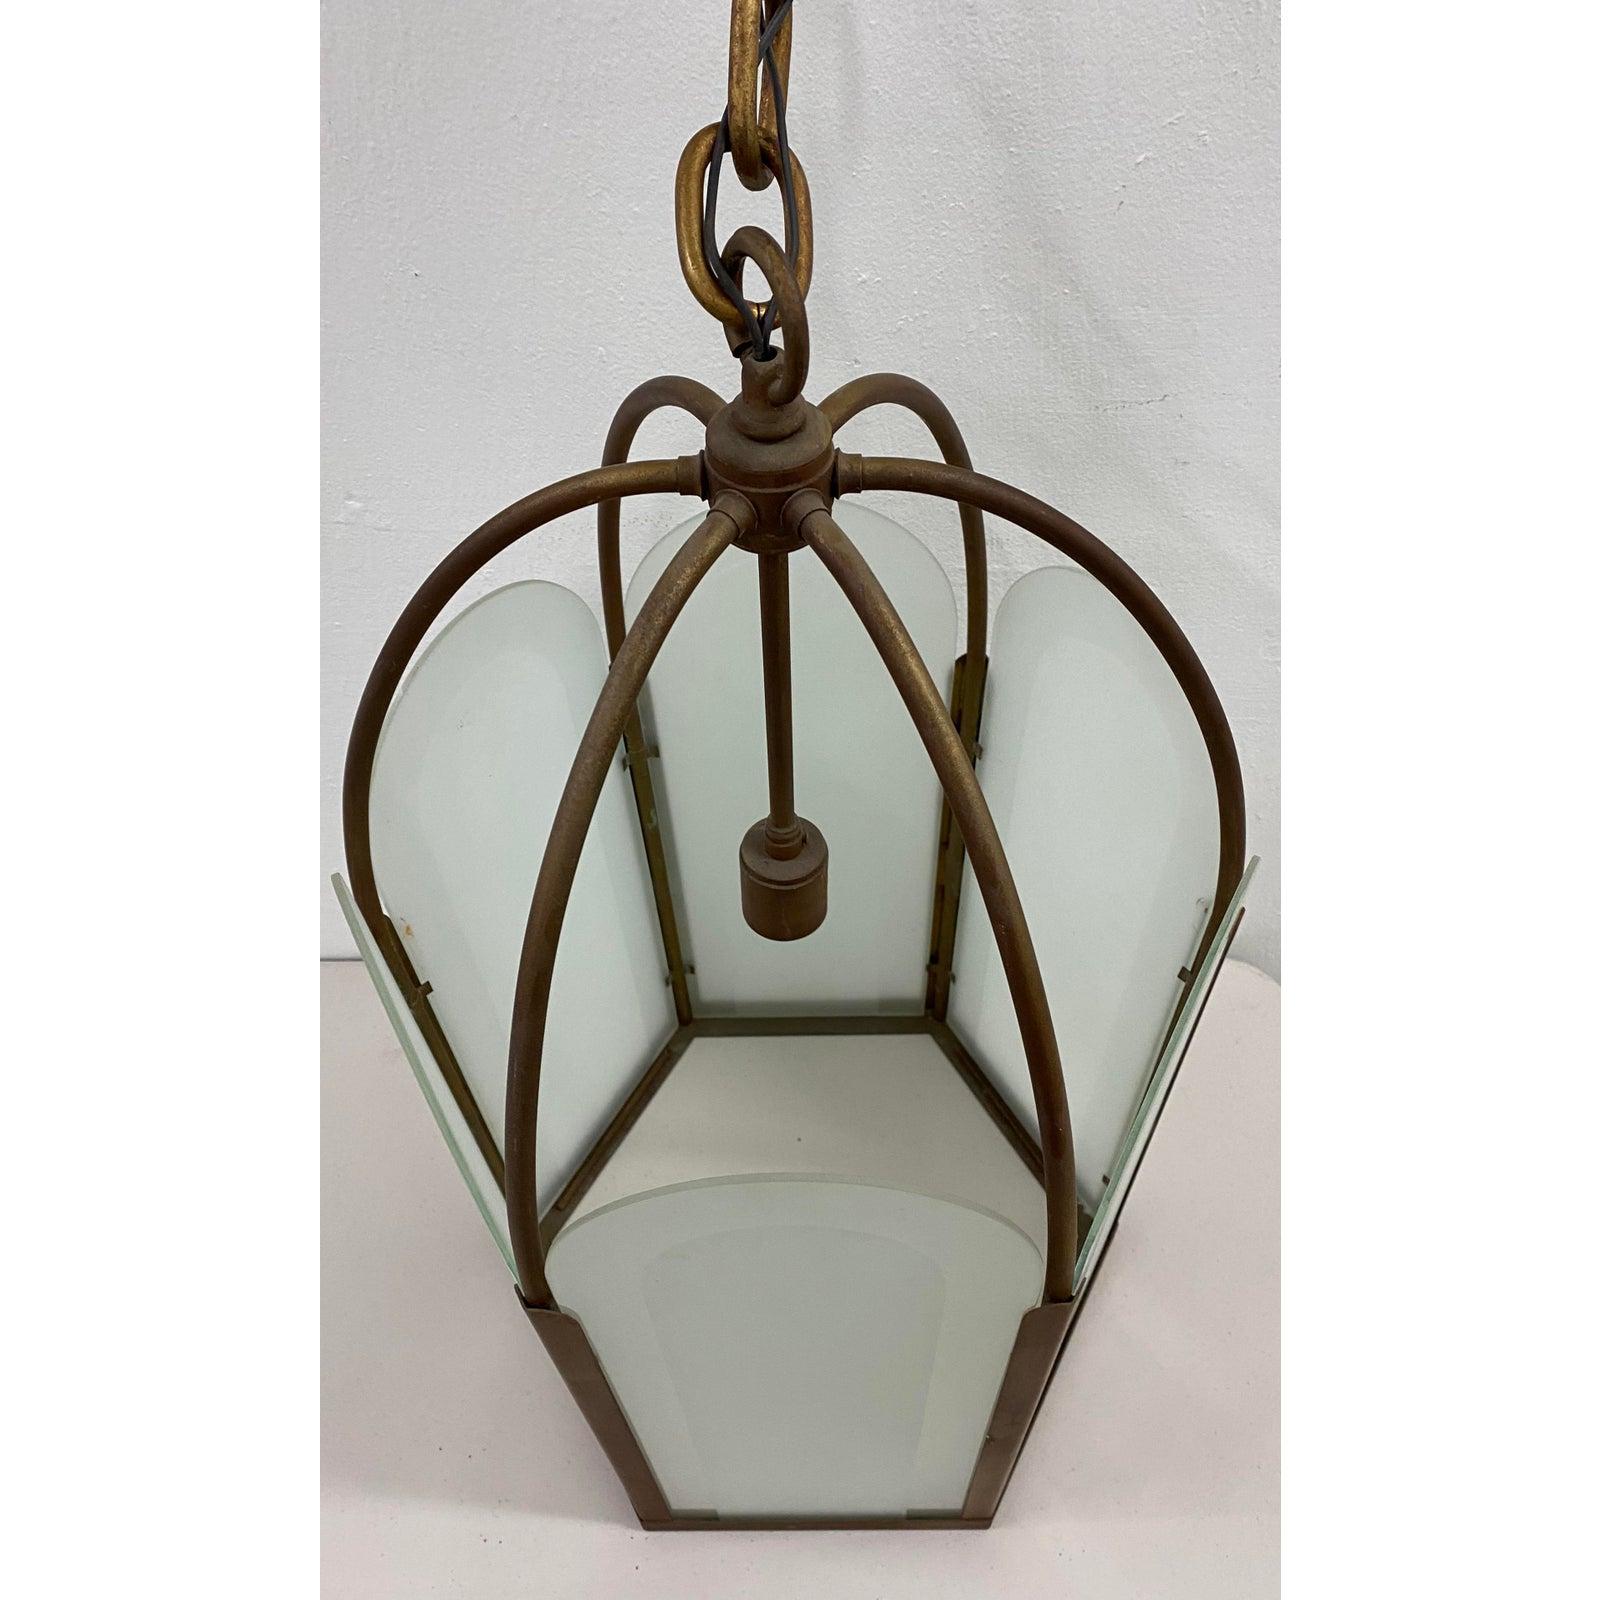 French Deco bronze & frosted glass single light hexagon pendant chandelier, circa 1920

Gorgeous pendant light. Six sides. Each frosted glass panels lifts up, making changing the bulb easy.

Comes with the original chain and canopy.

The lamp